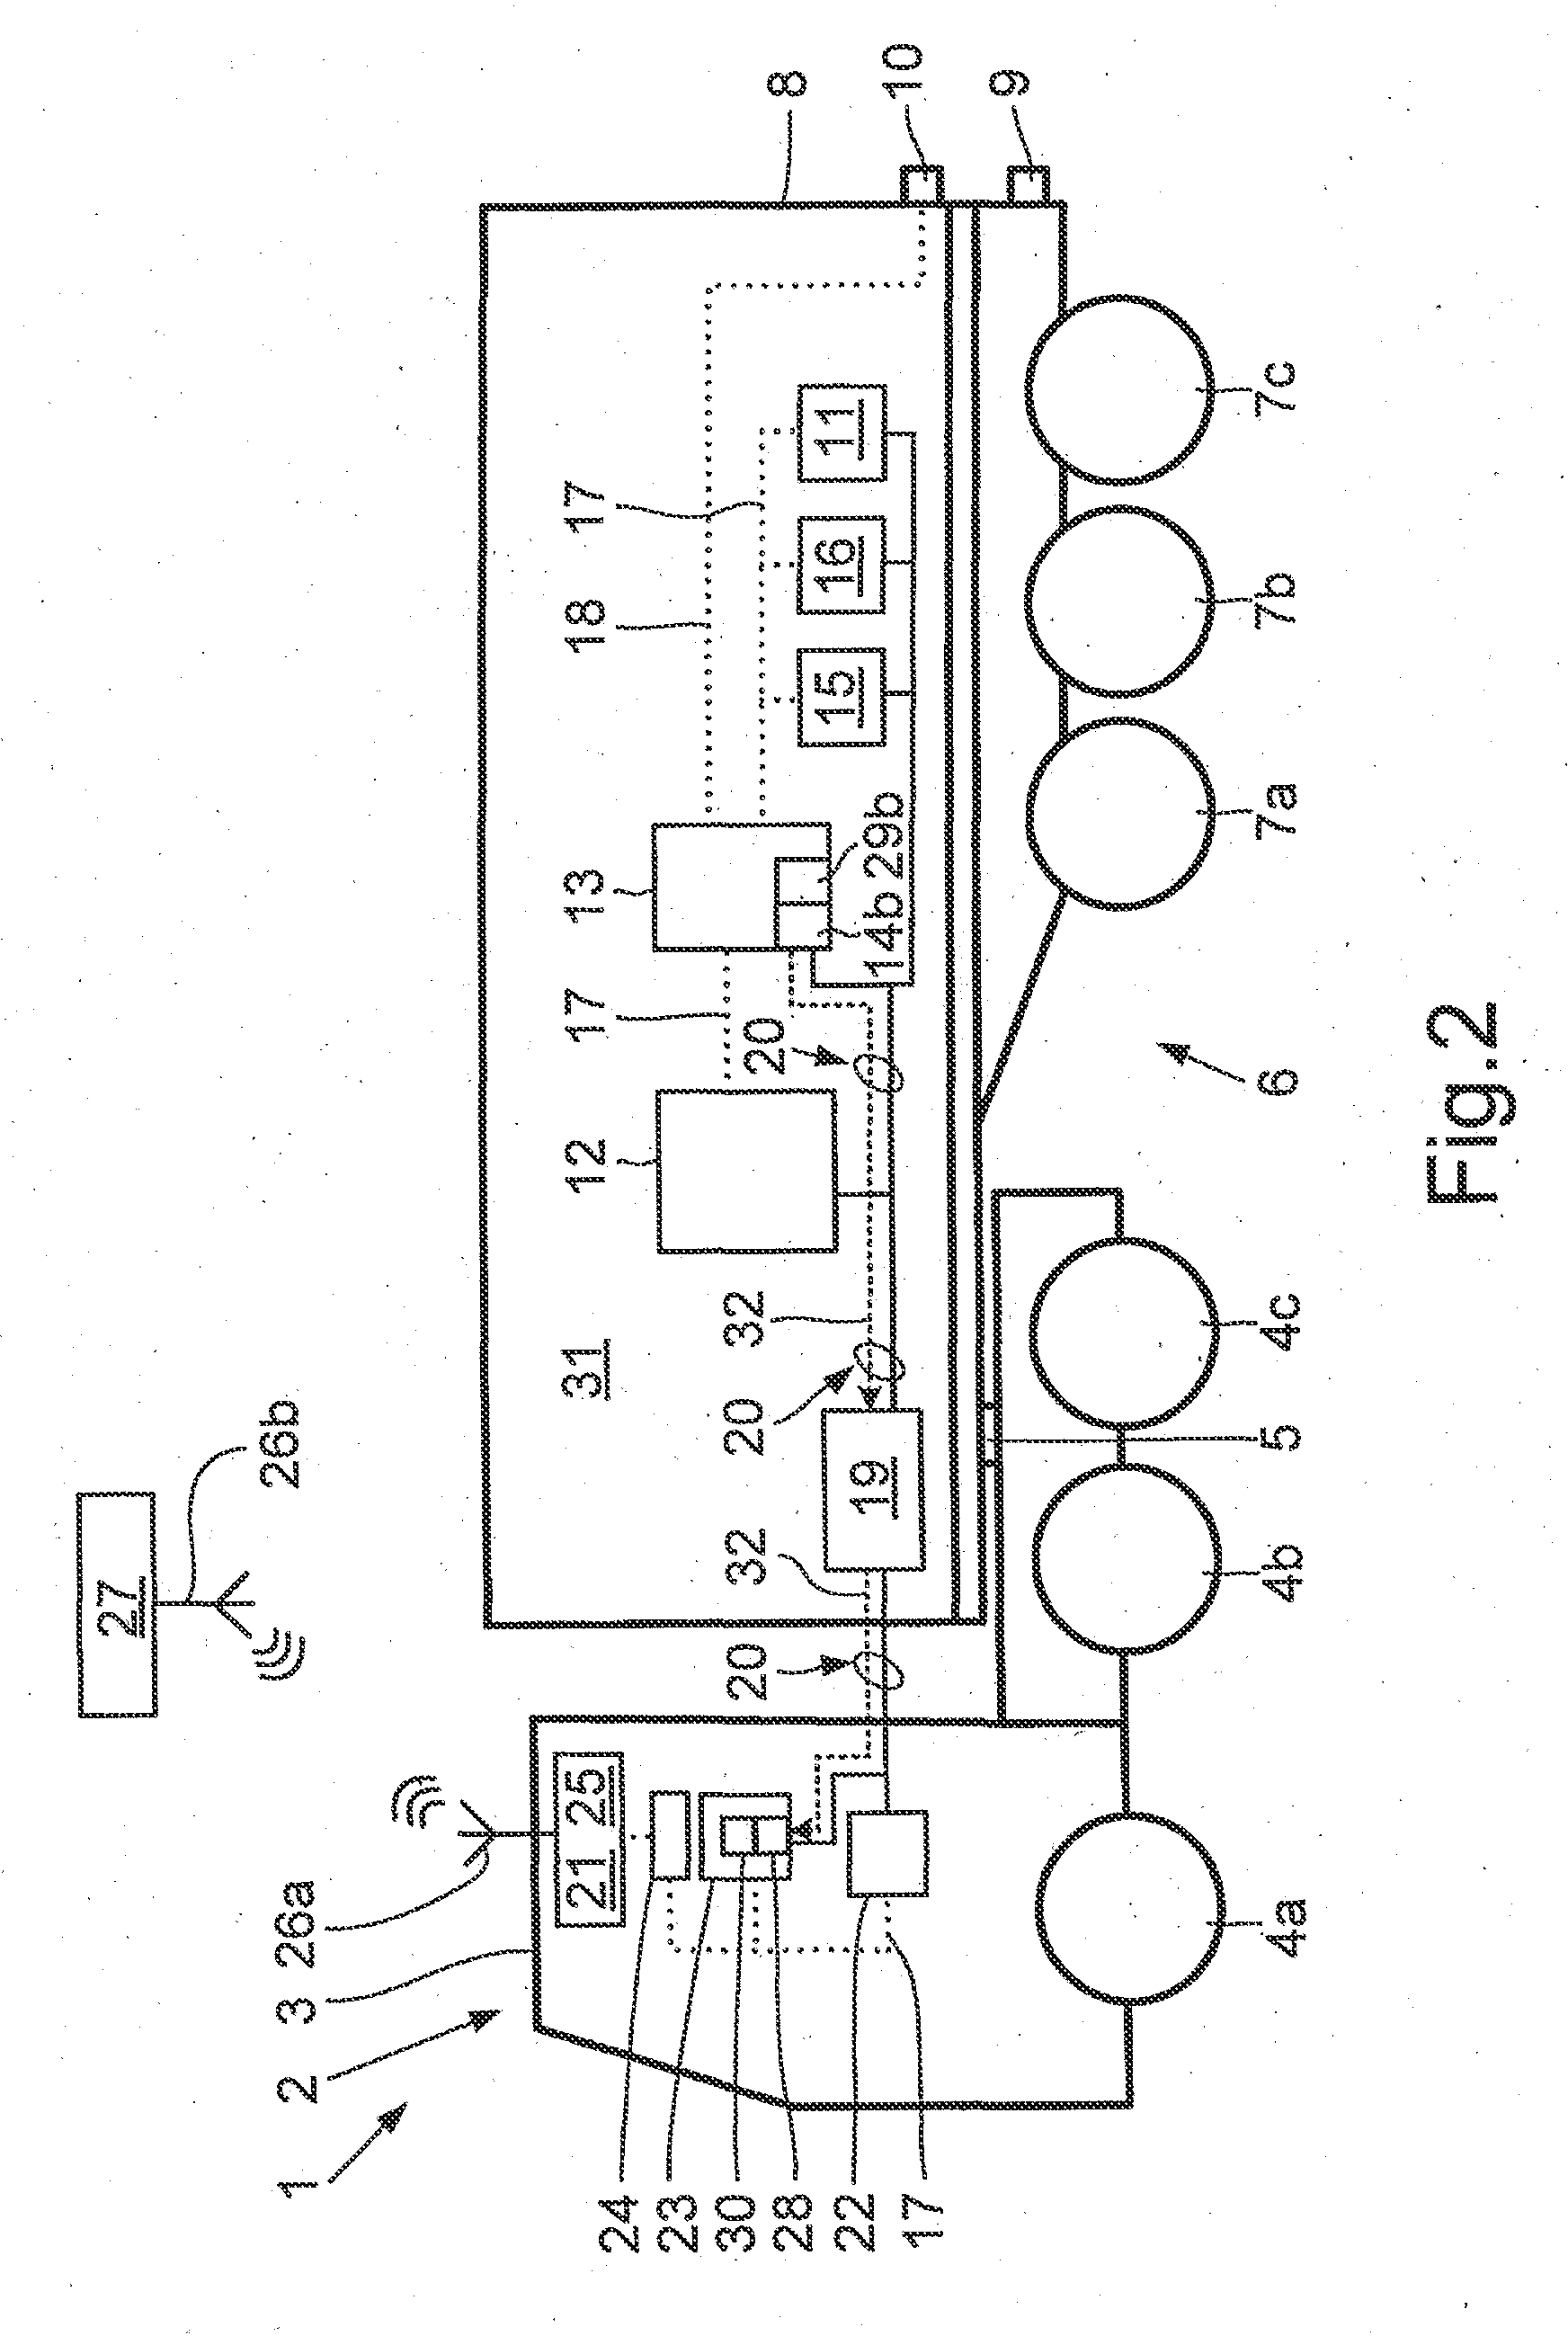 Method and System for Transmitting Telematics Data from a Truck to a Telematics Portal